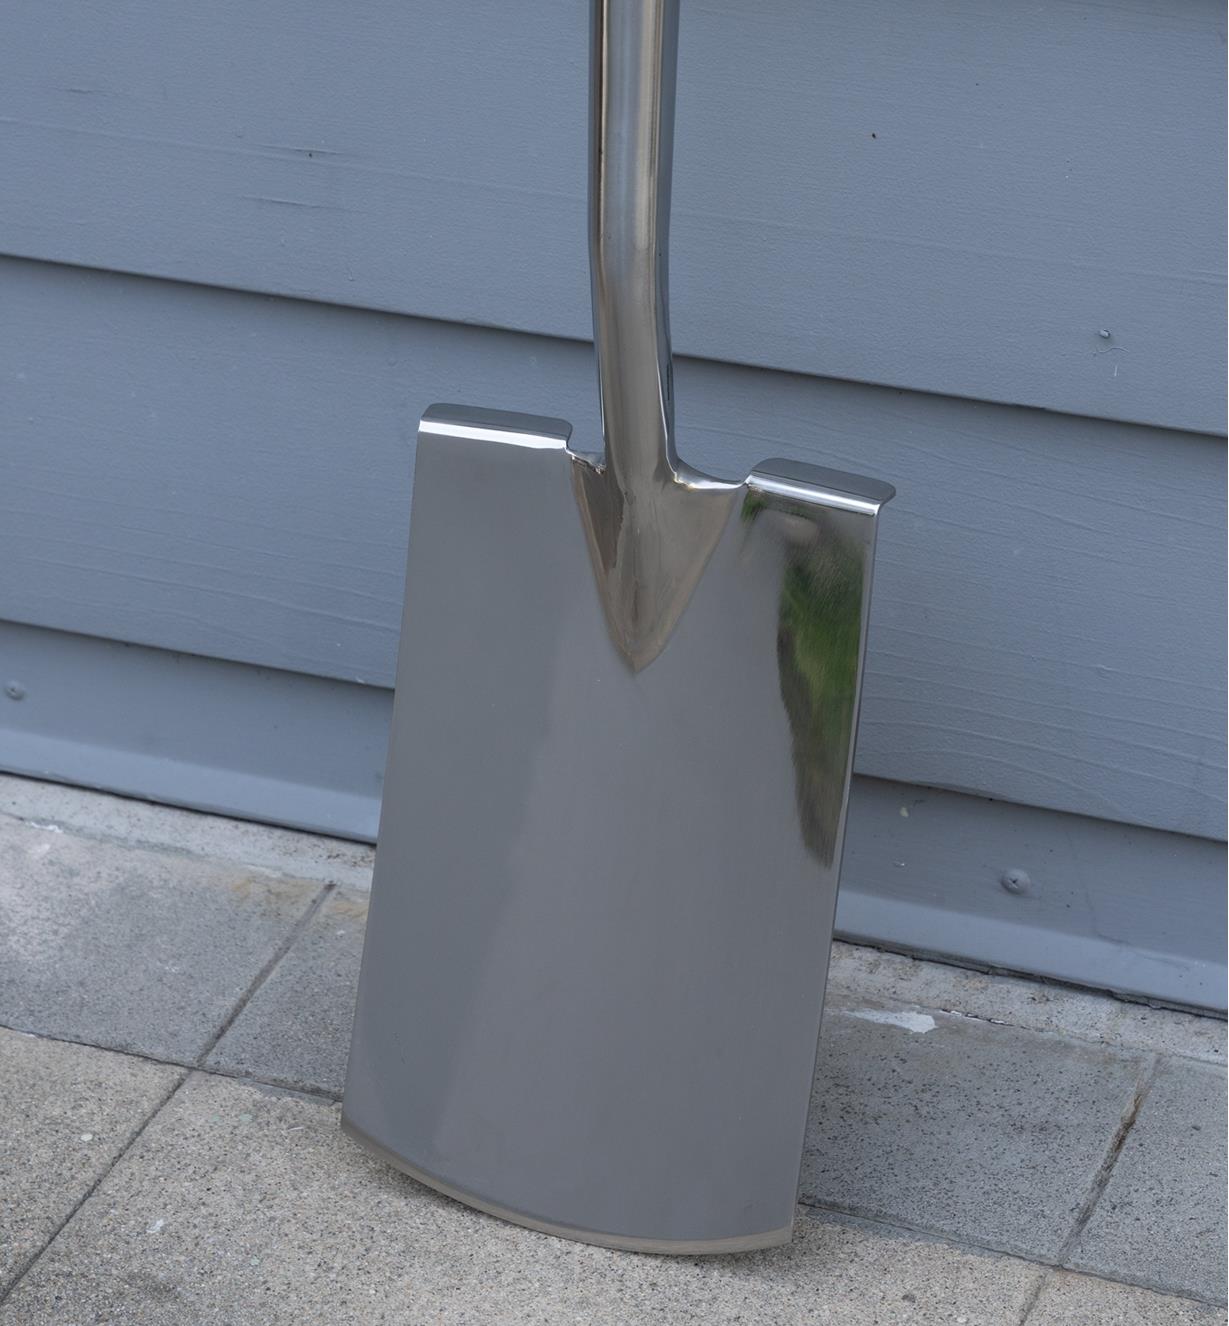 The stainless-steel head of the digging spade